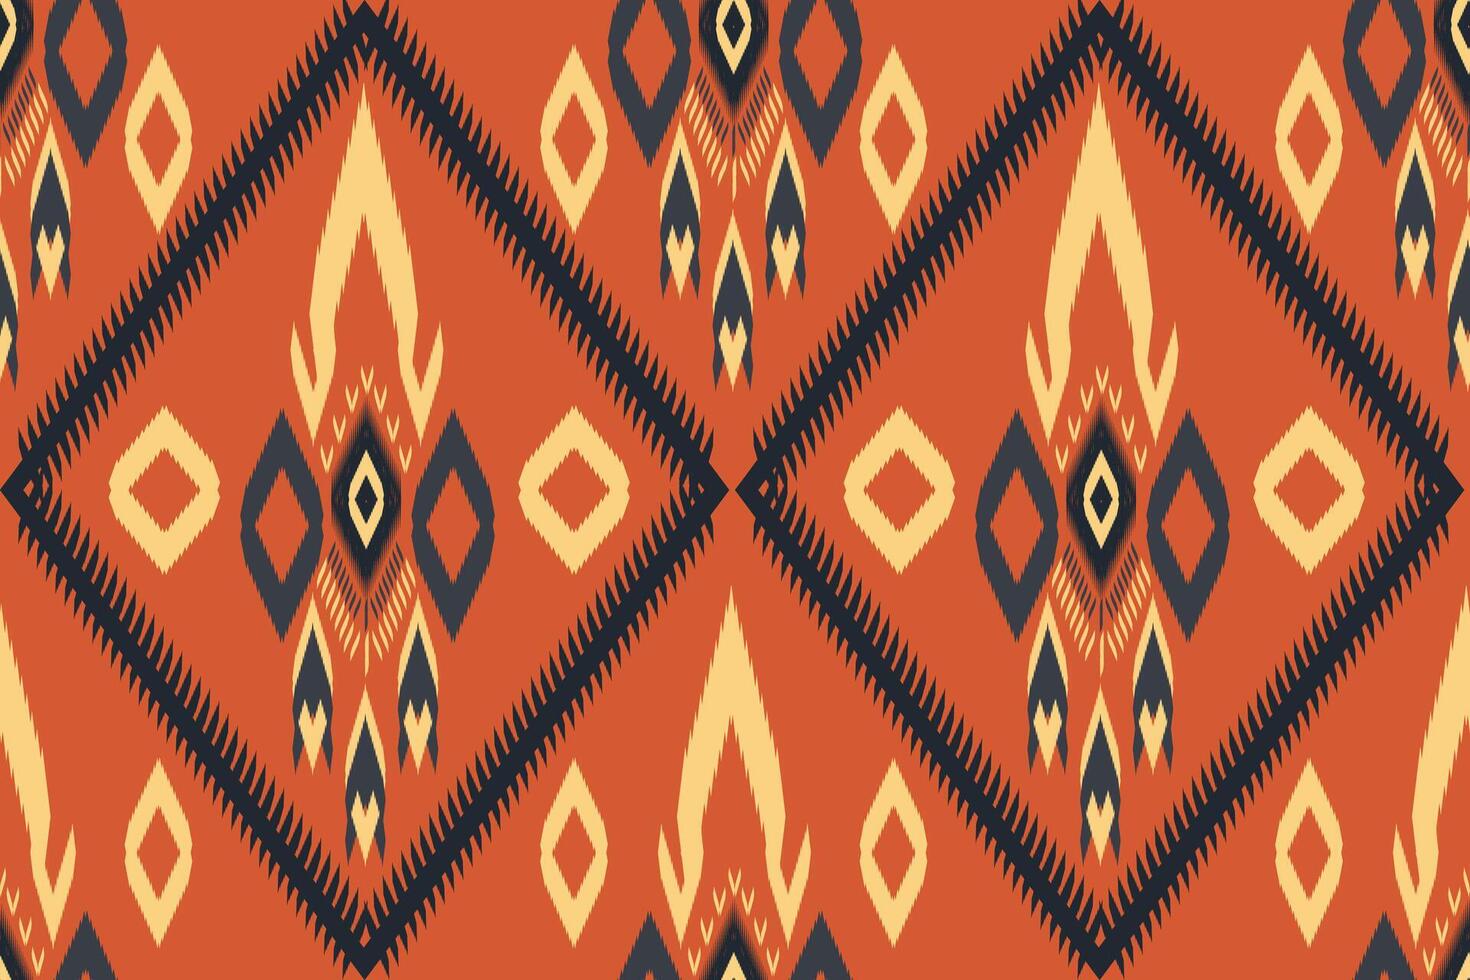 seamless pattern with shapes Geometric ethnic oriental ikat pattern traditional Design for background,carpet,wallpaper,clothing,wrapping,Batik,fabric,Vector illustration.embroidery style. vector